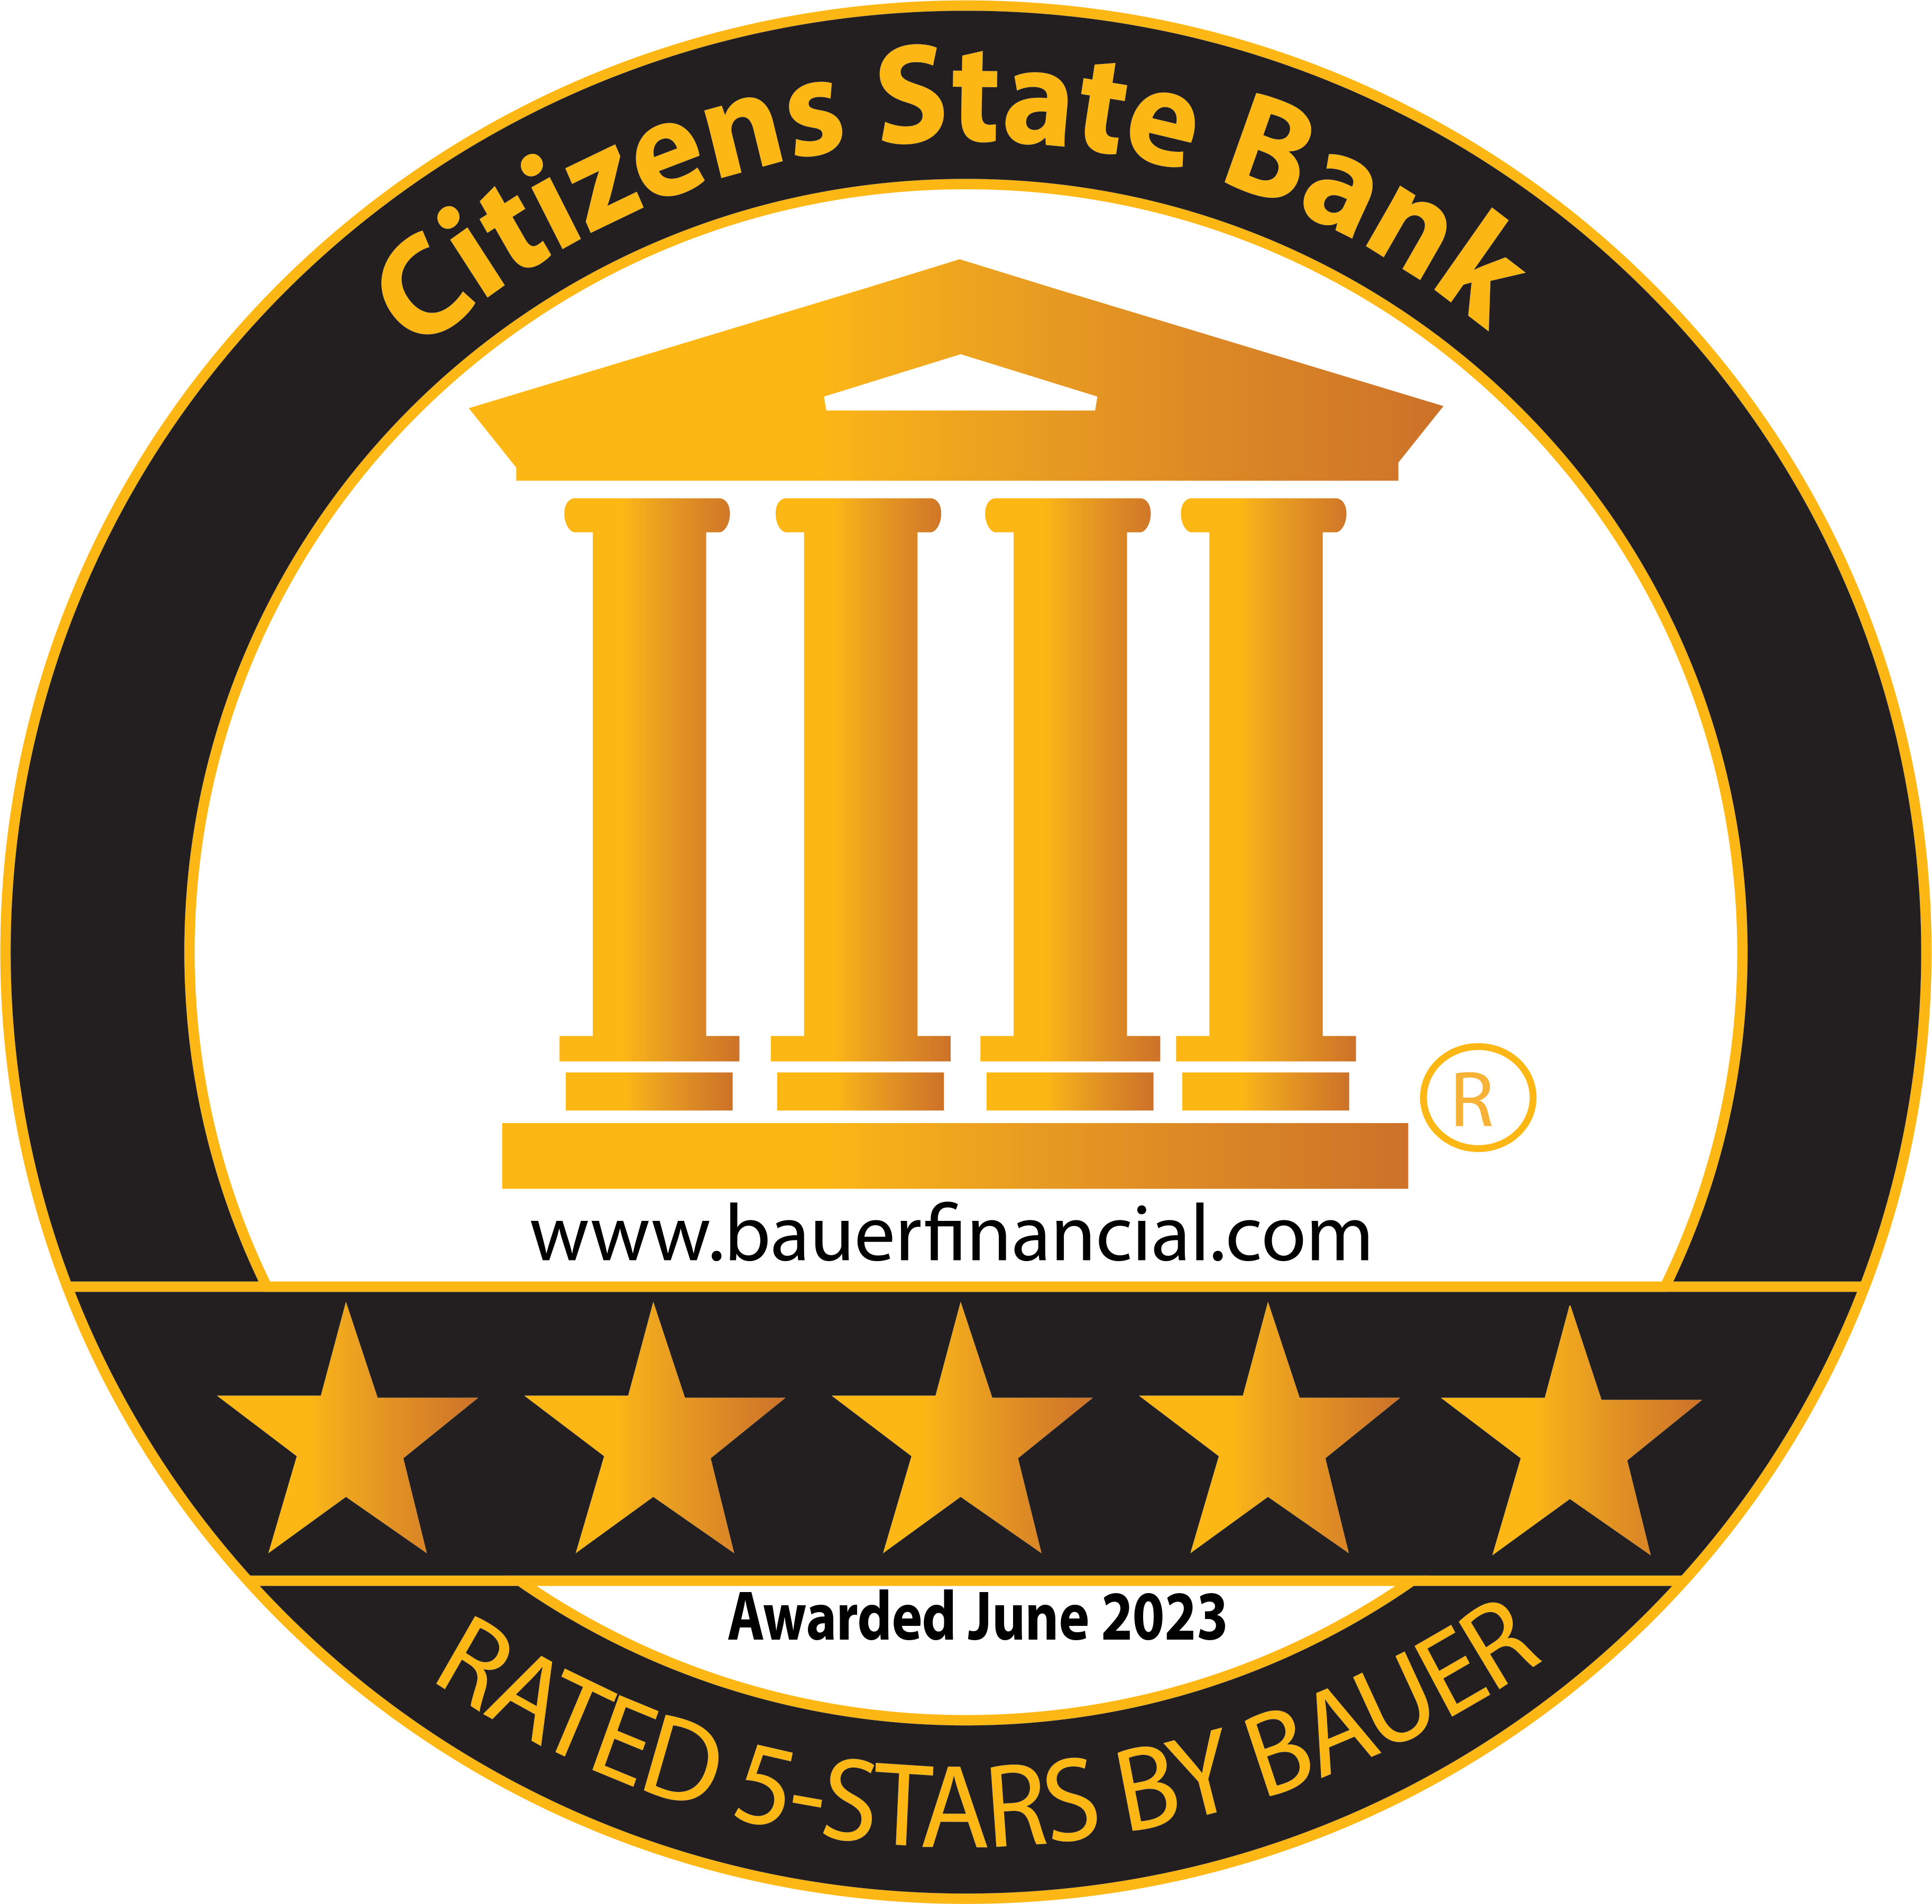 Logo of a gold building with columns in a black circle rating Citizens State Bank 5-Stars by Bauer.